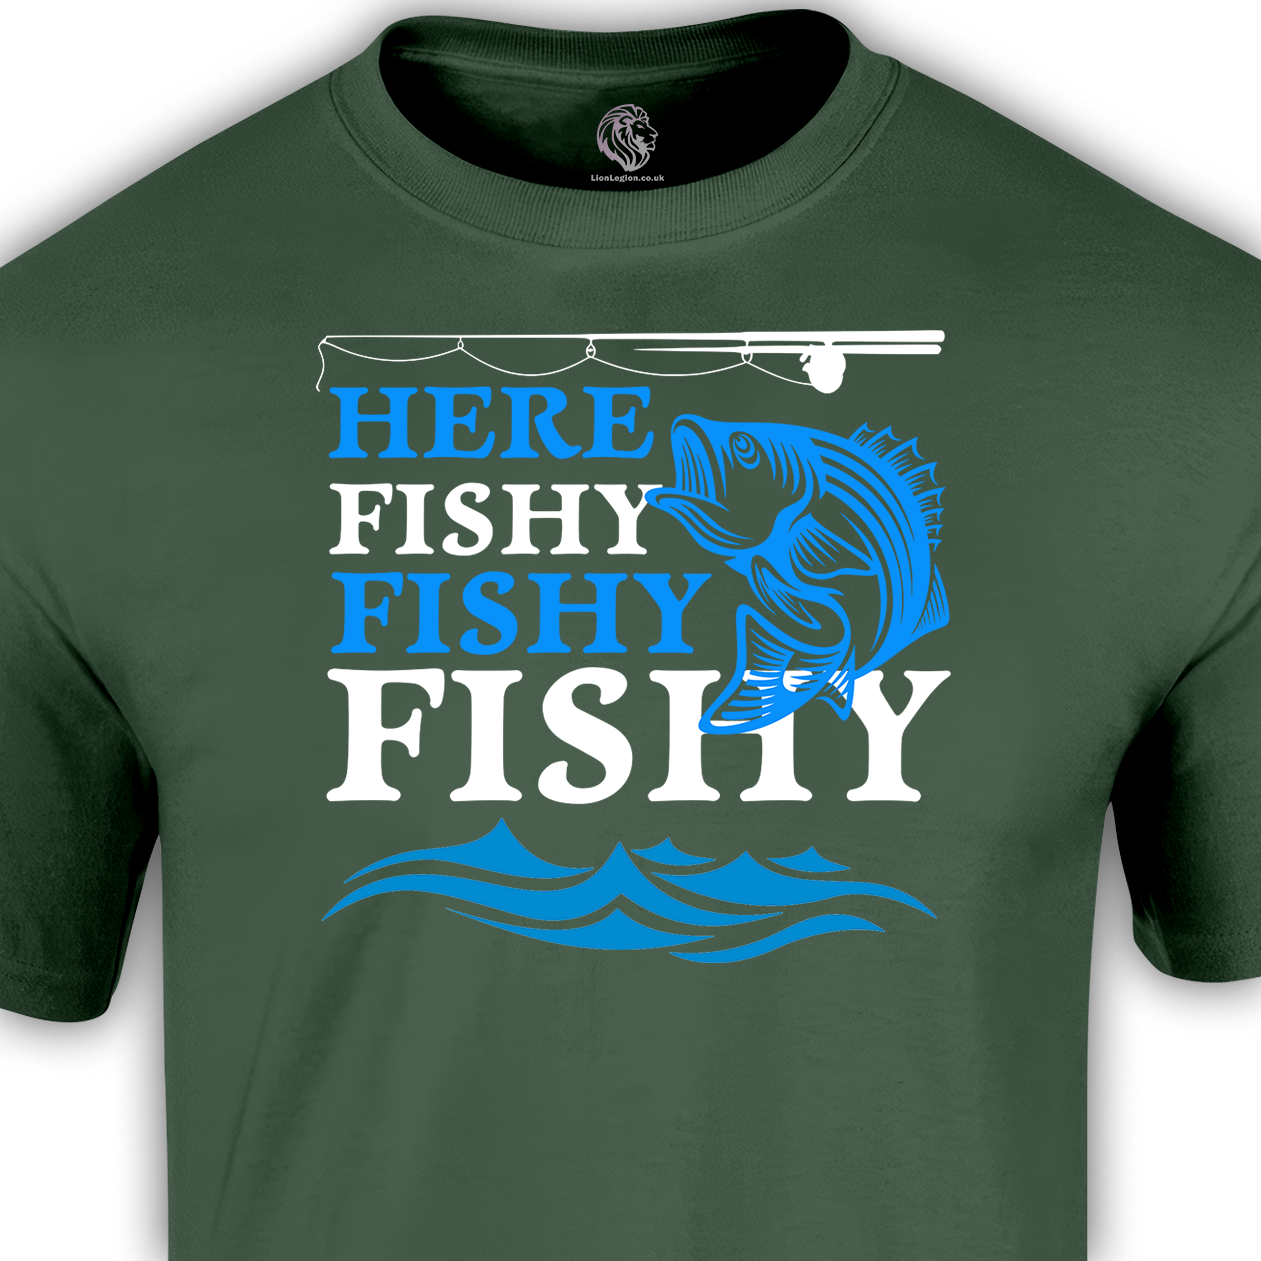 Hooked on Humour: Funny Fishing T-Shirts